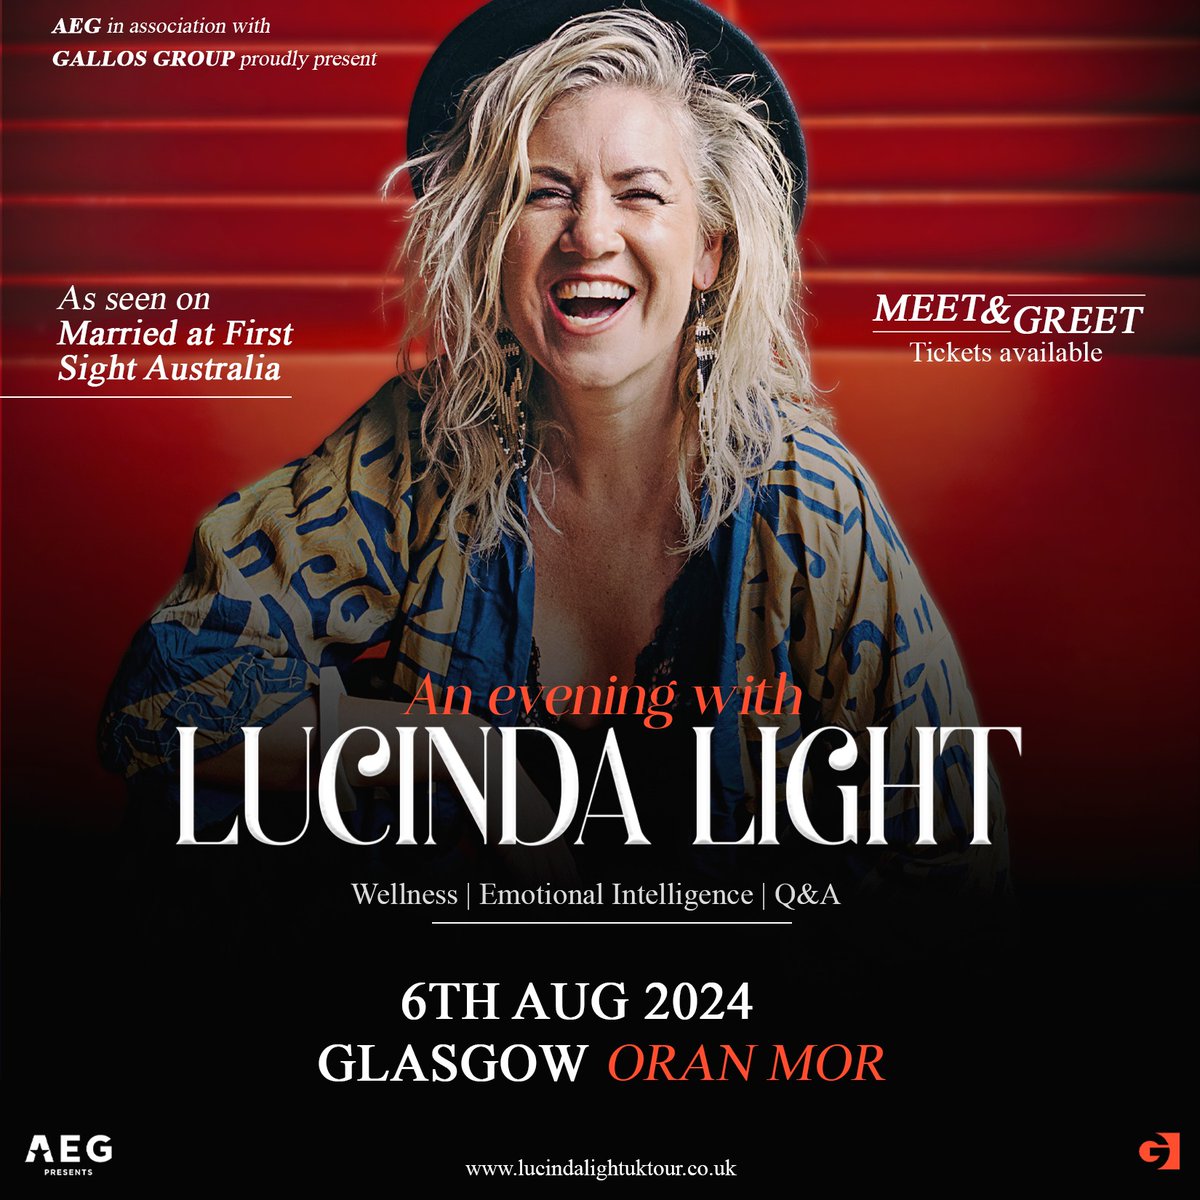 Married at First Sight Australia star Lucinda Light announces a tour of the UK which will include a night at Oran Mor Glasgow on Tuesday 6th August! 𝗙𝗶𝗻𝗱 𝗼𝘂𝘁 𝗺𝗼𝗿𝗲: tinyurl.com/3bmx57wa